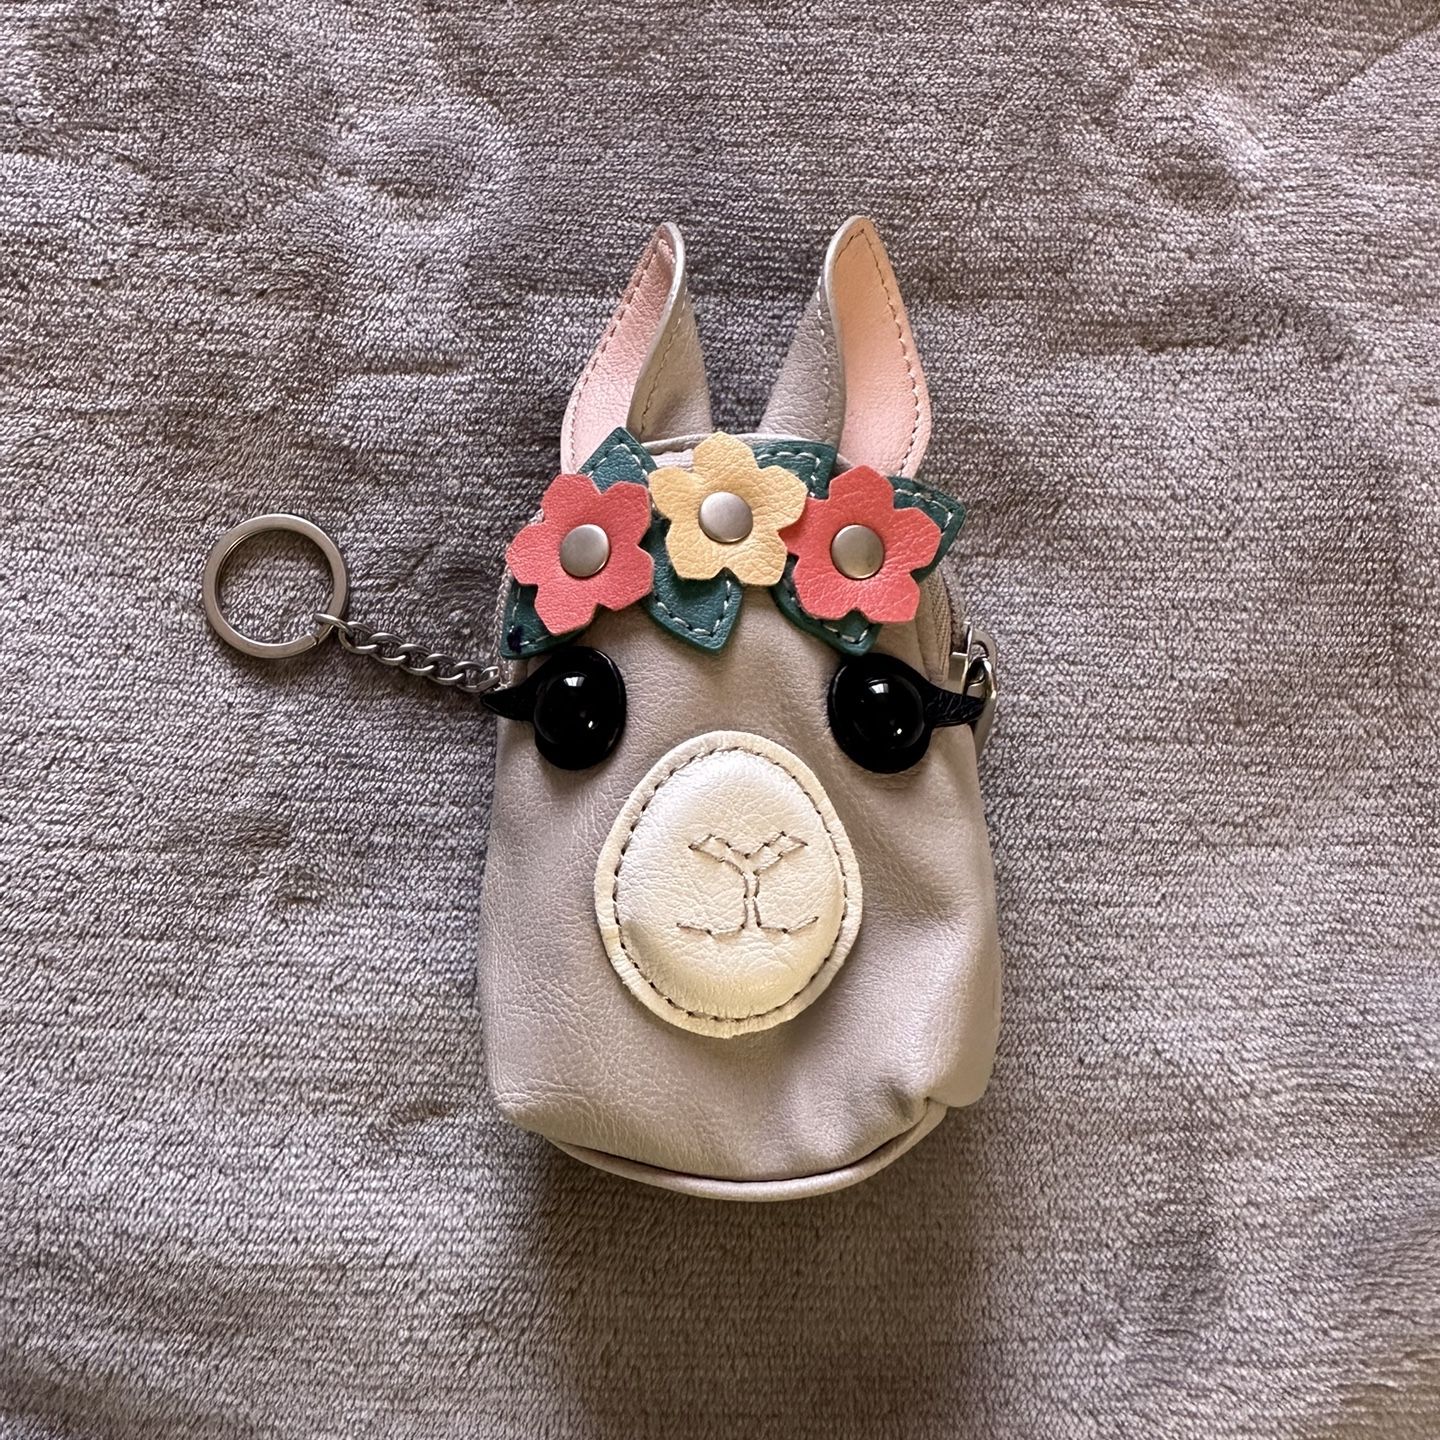 Keychain Coin Purse Short Wallet for Sale in North Las Vegas, NV - OfferUp